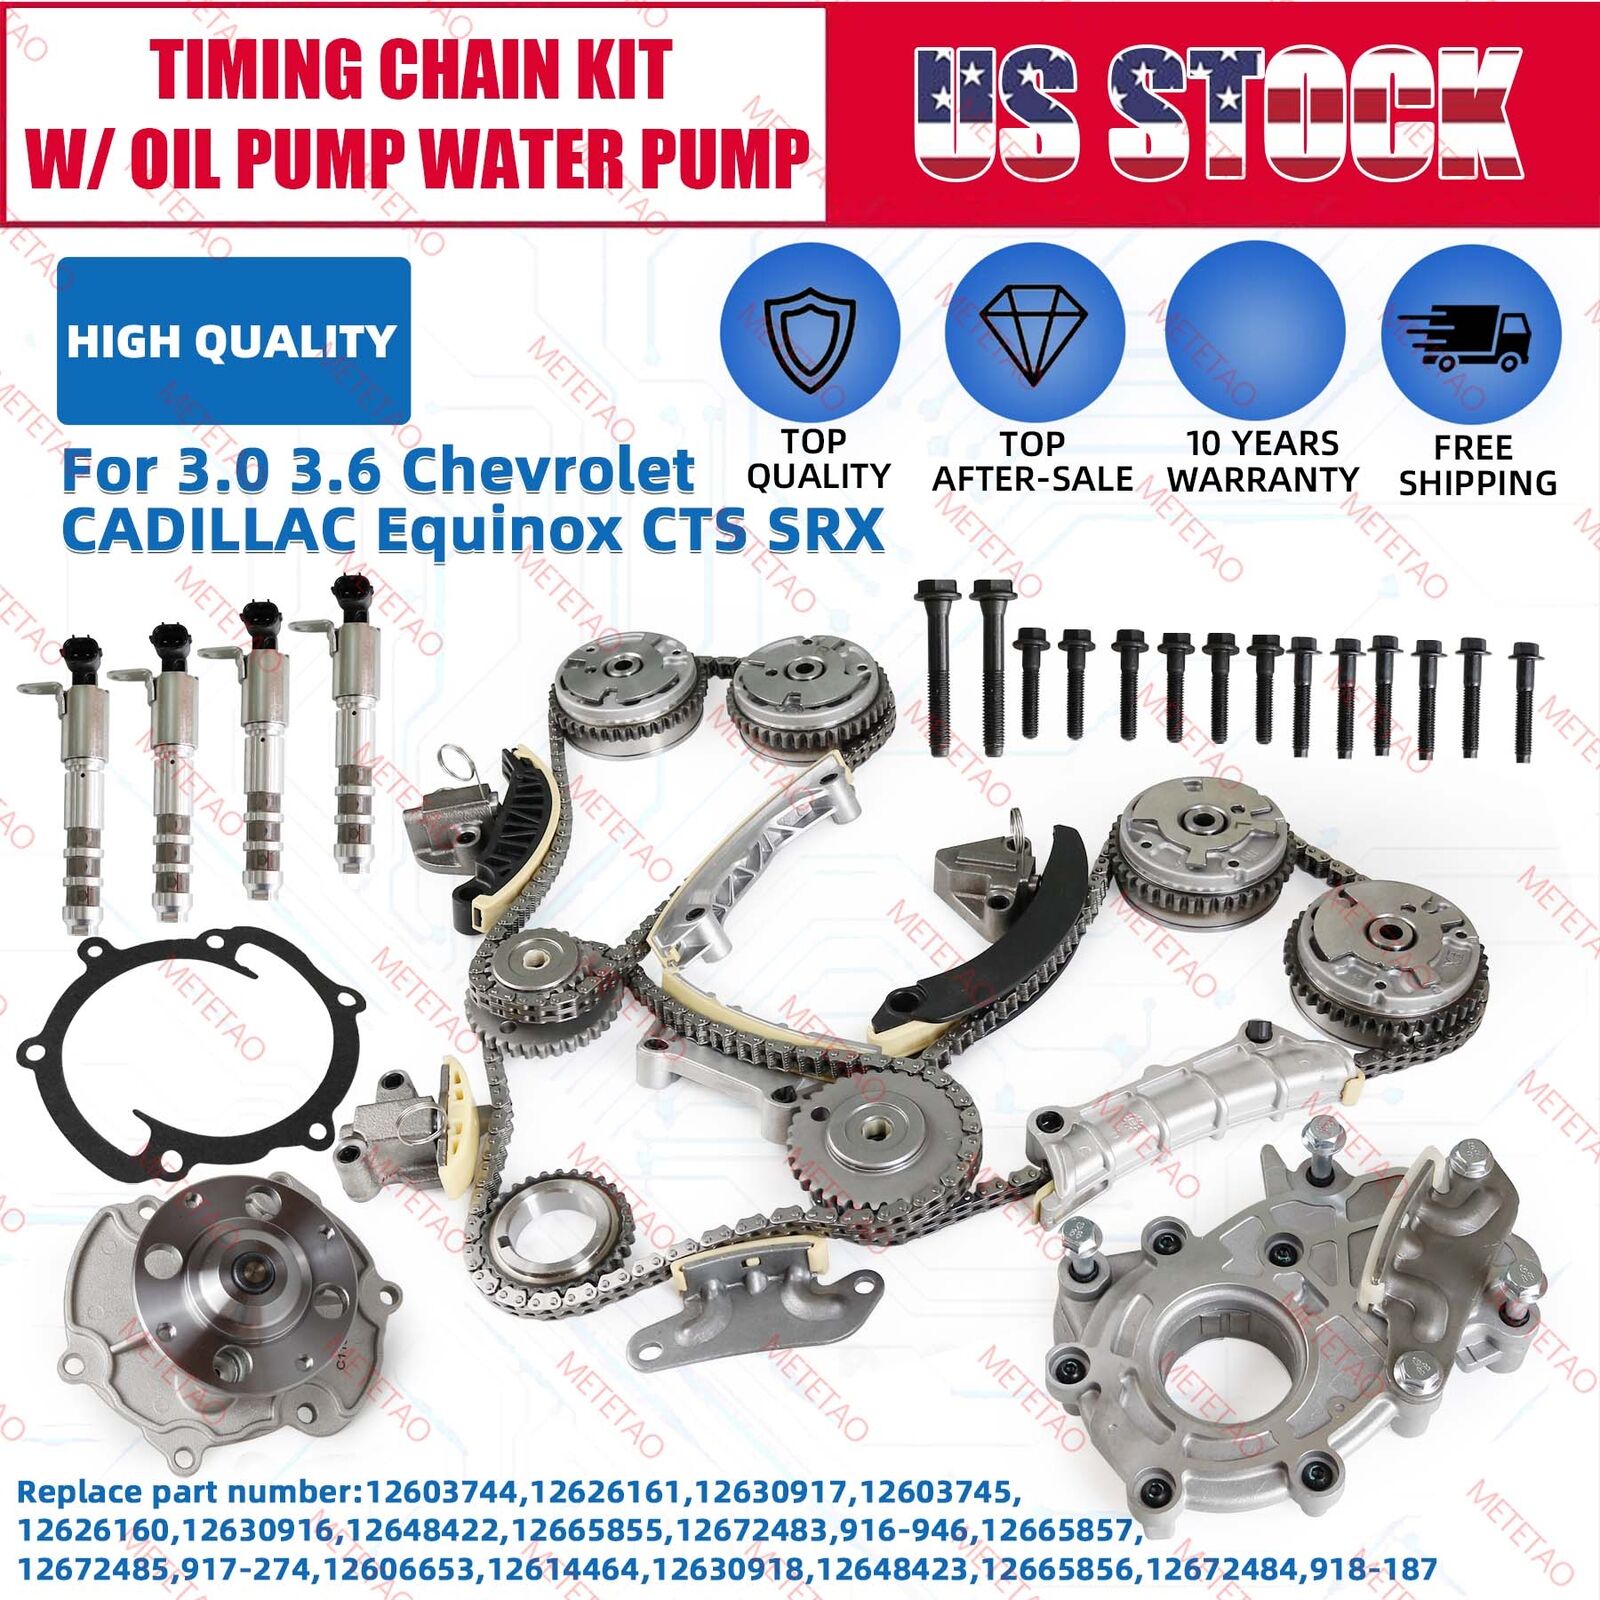 Timing Chain Kit Oil Water Pump 4VVT Solenoid For 06-16 Chevy Buick Traverse GMC